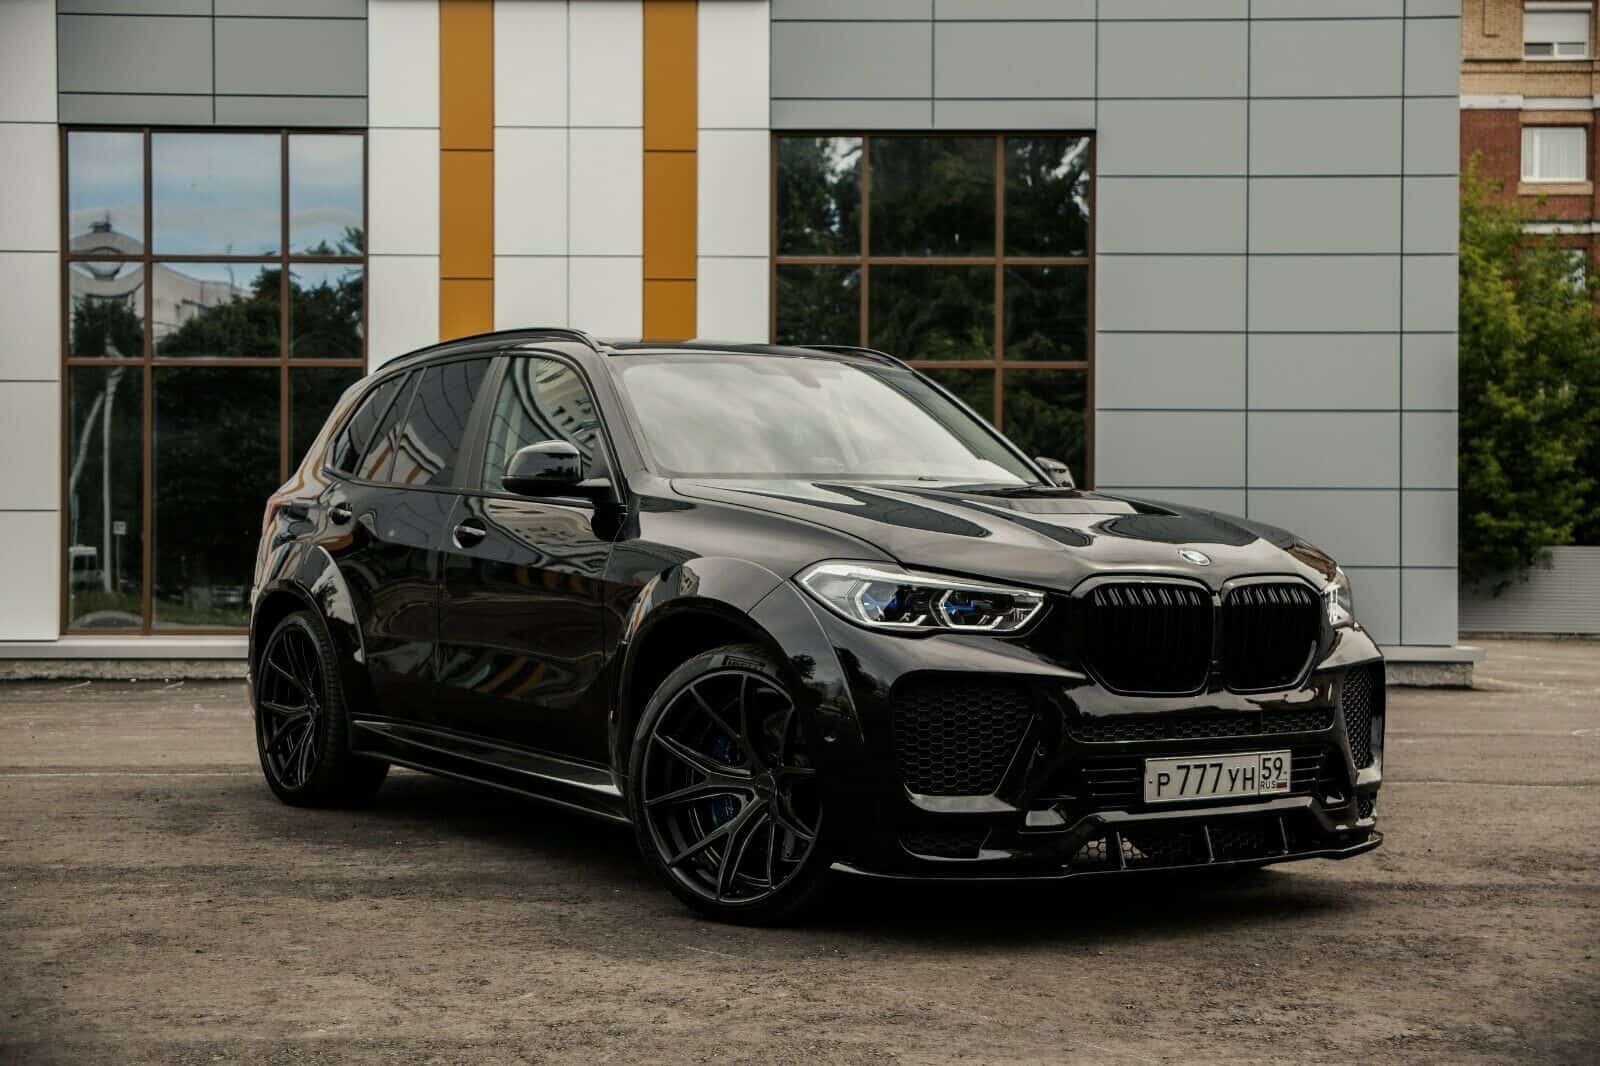 The BMW X5 G05 with a tuning body kit made by “Renegade-Design